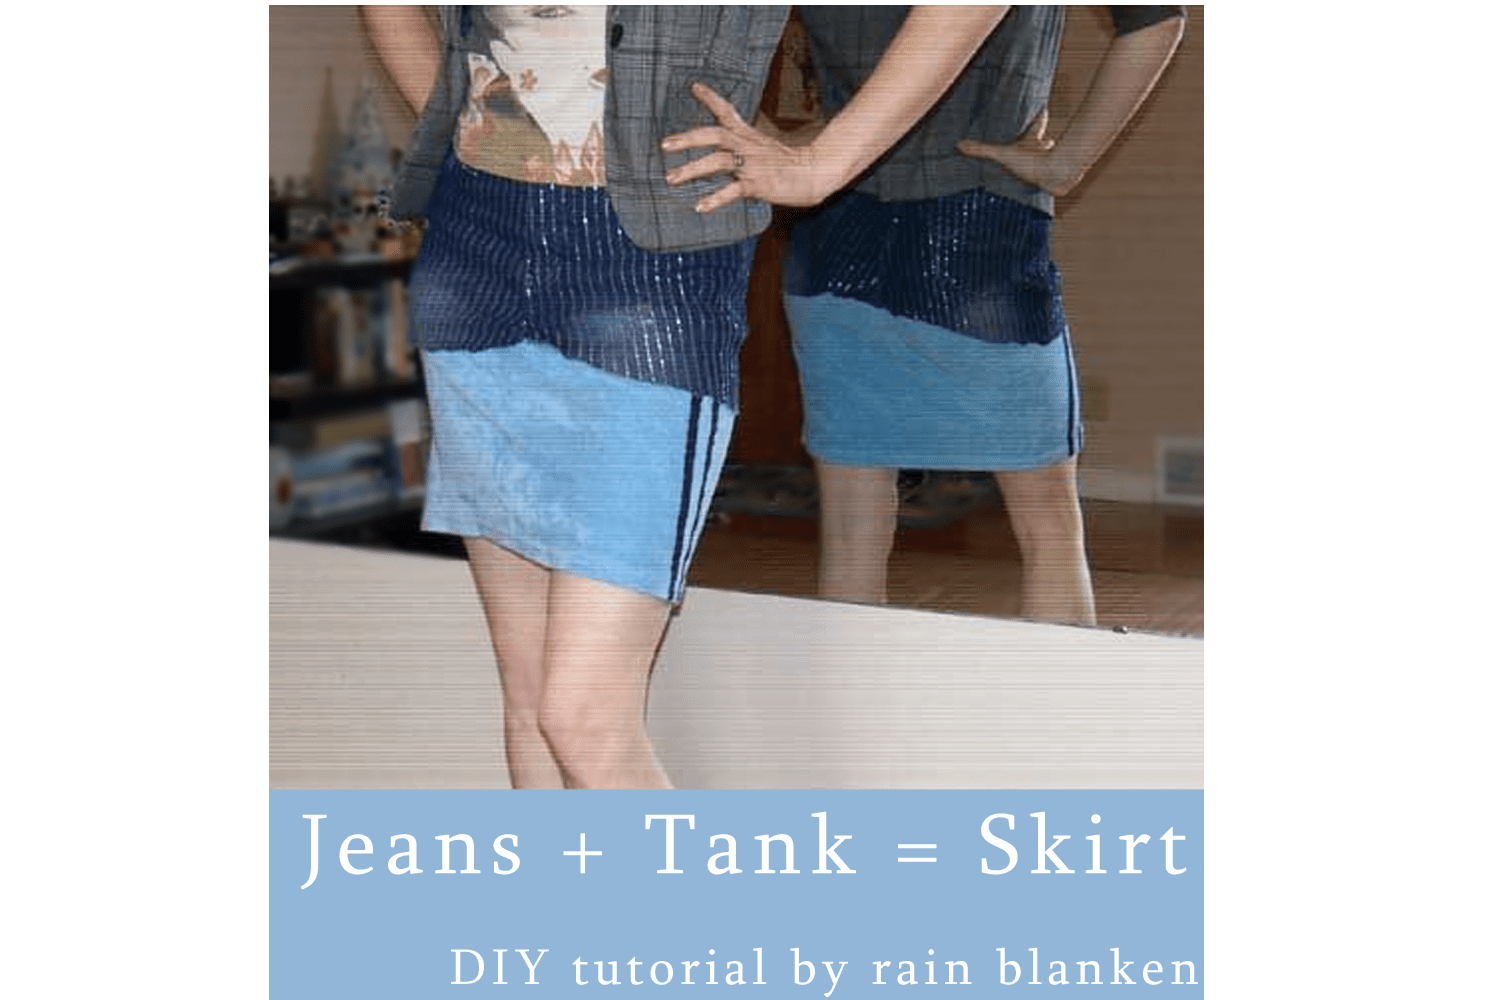 Upcycled Fashion: 5 Ways to Turn Jeans into a Skirt